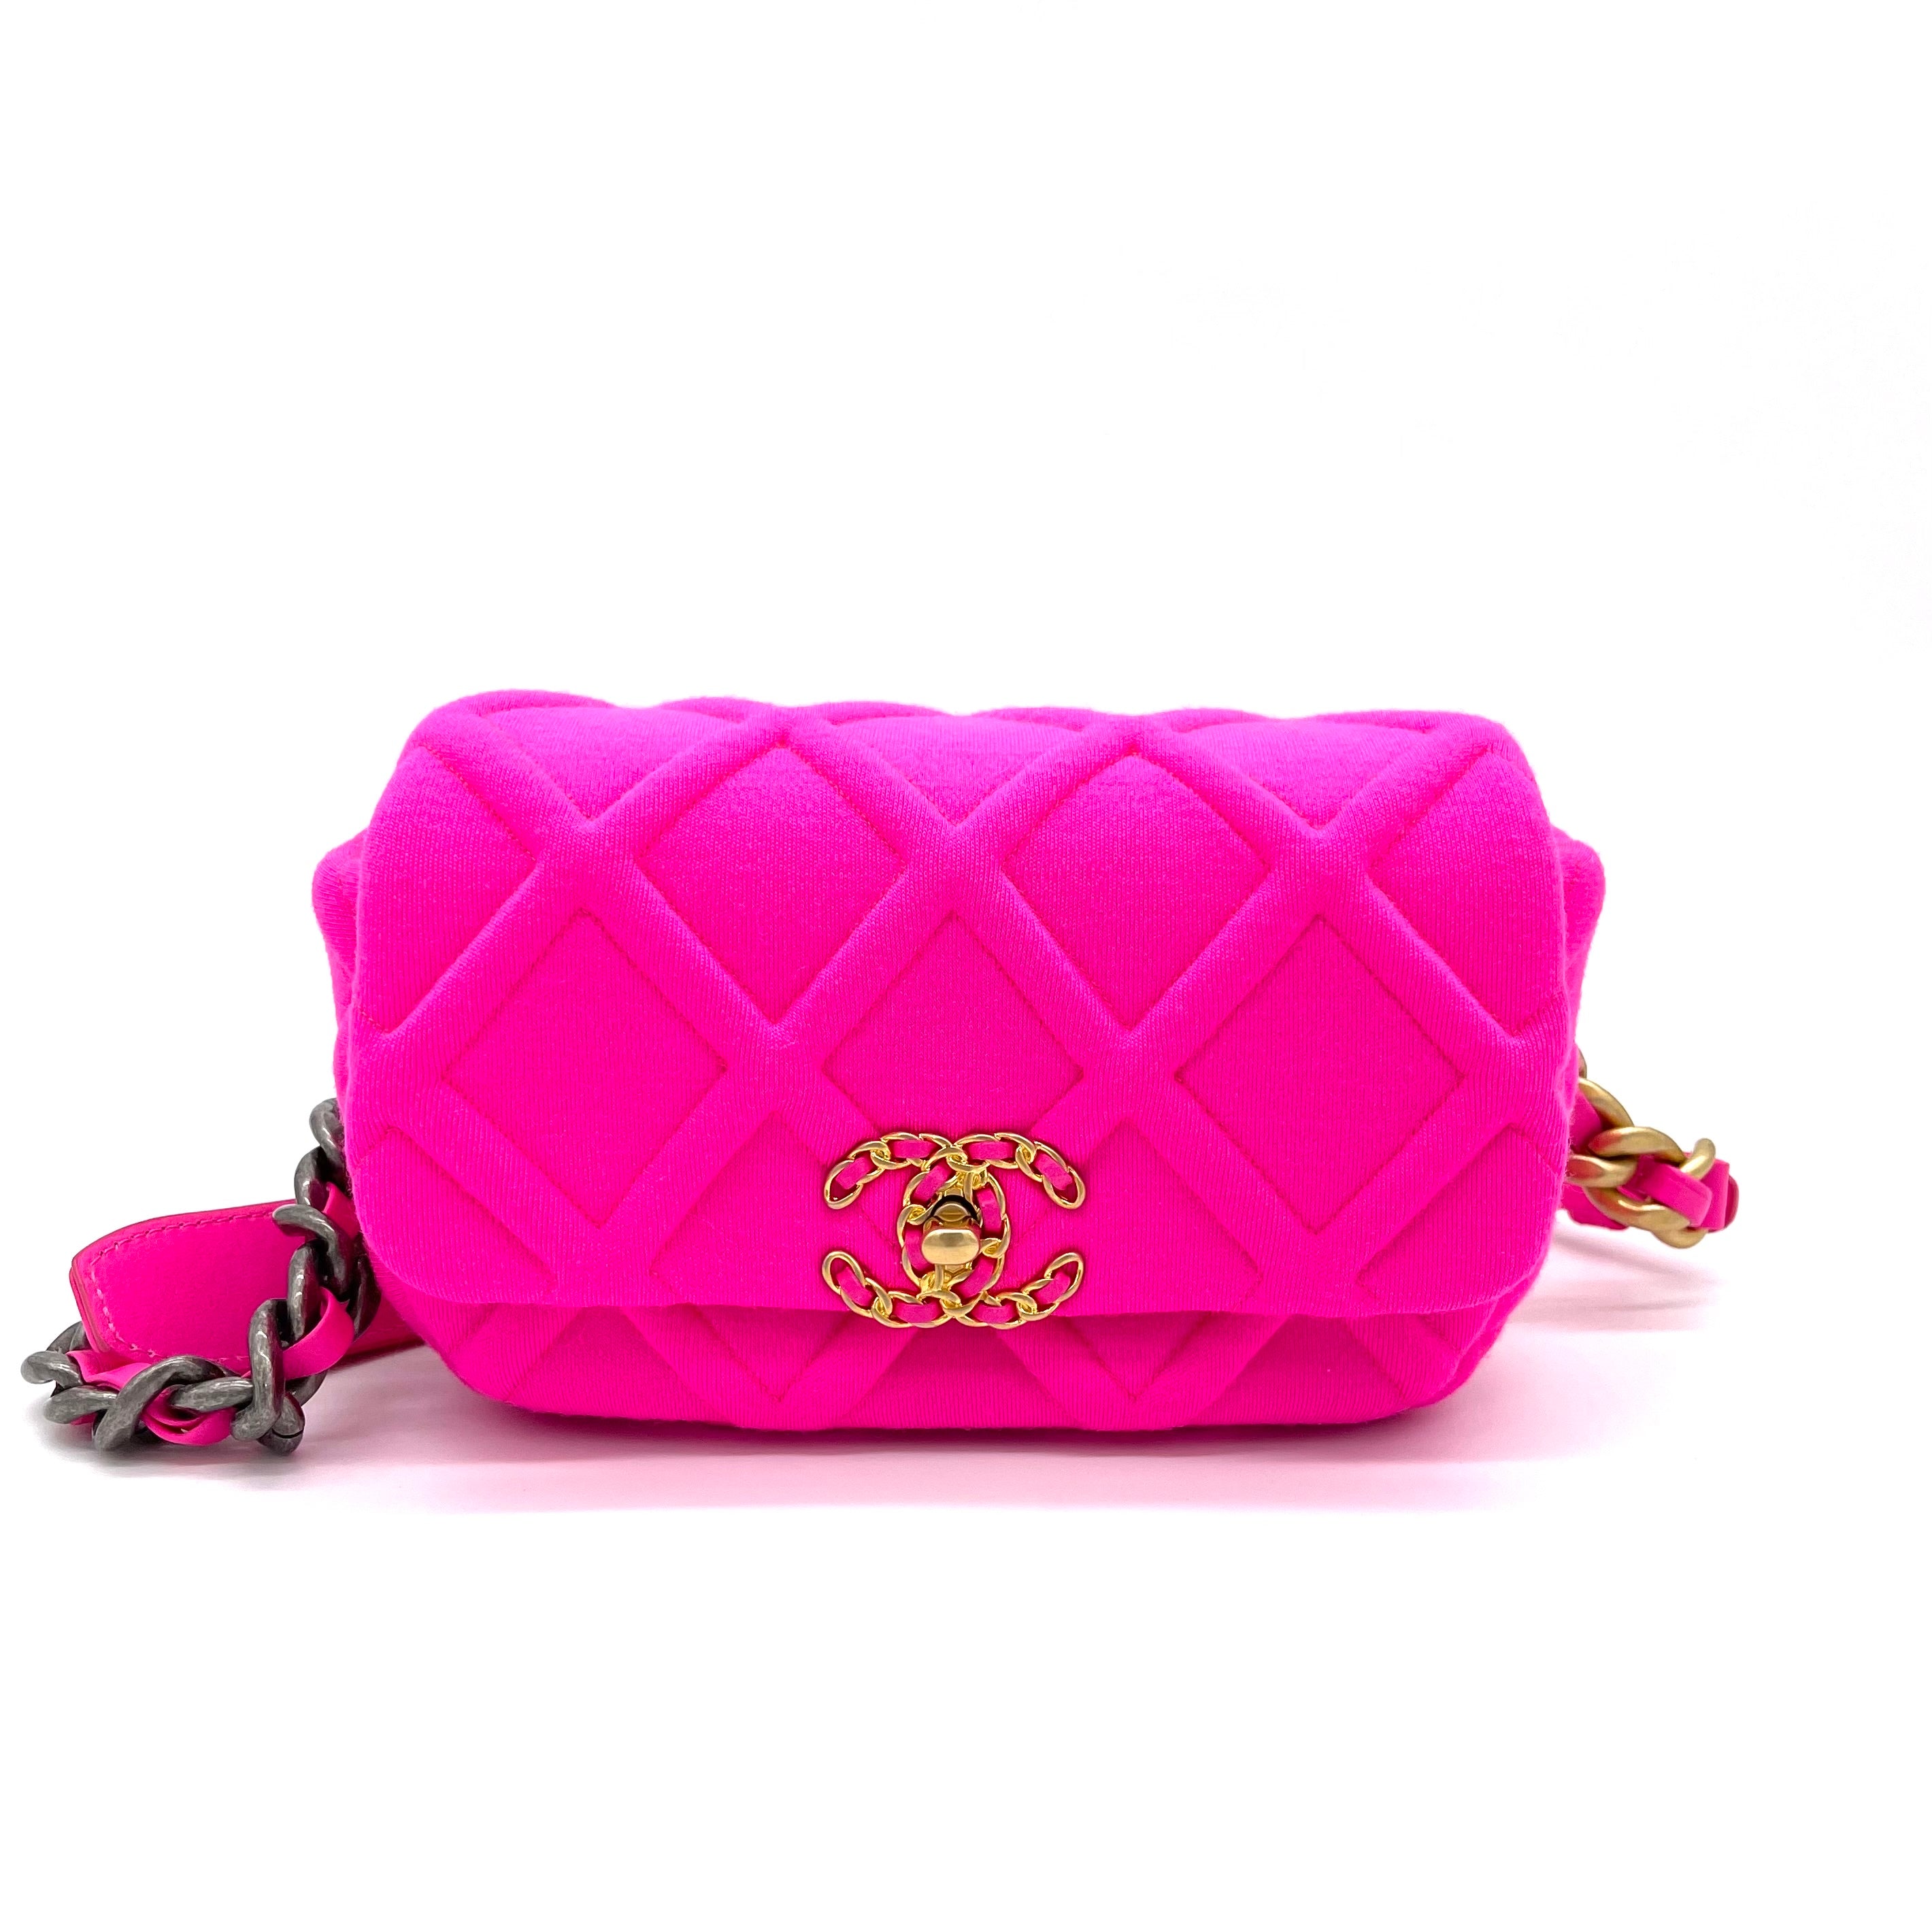 Chanel Neon Pink Quilted Jersey Maxi 19 Flap Gold Hardware, 2020 Available  For Immediate Sale At Sotheby's